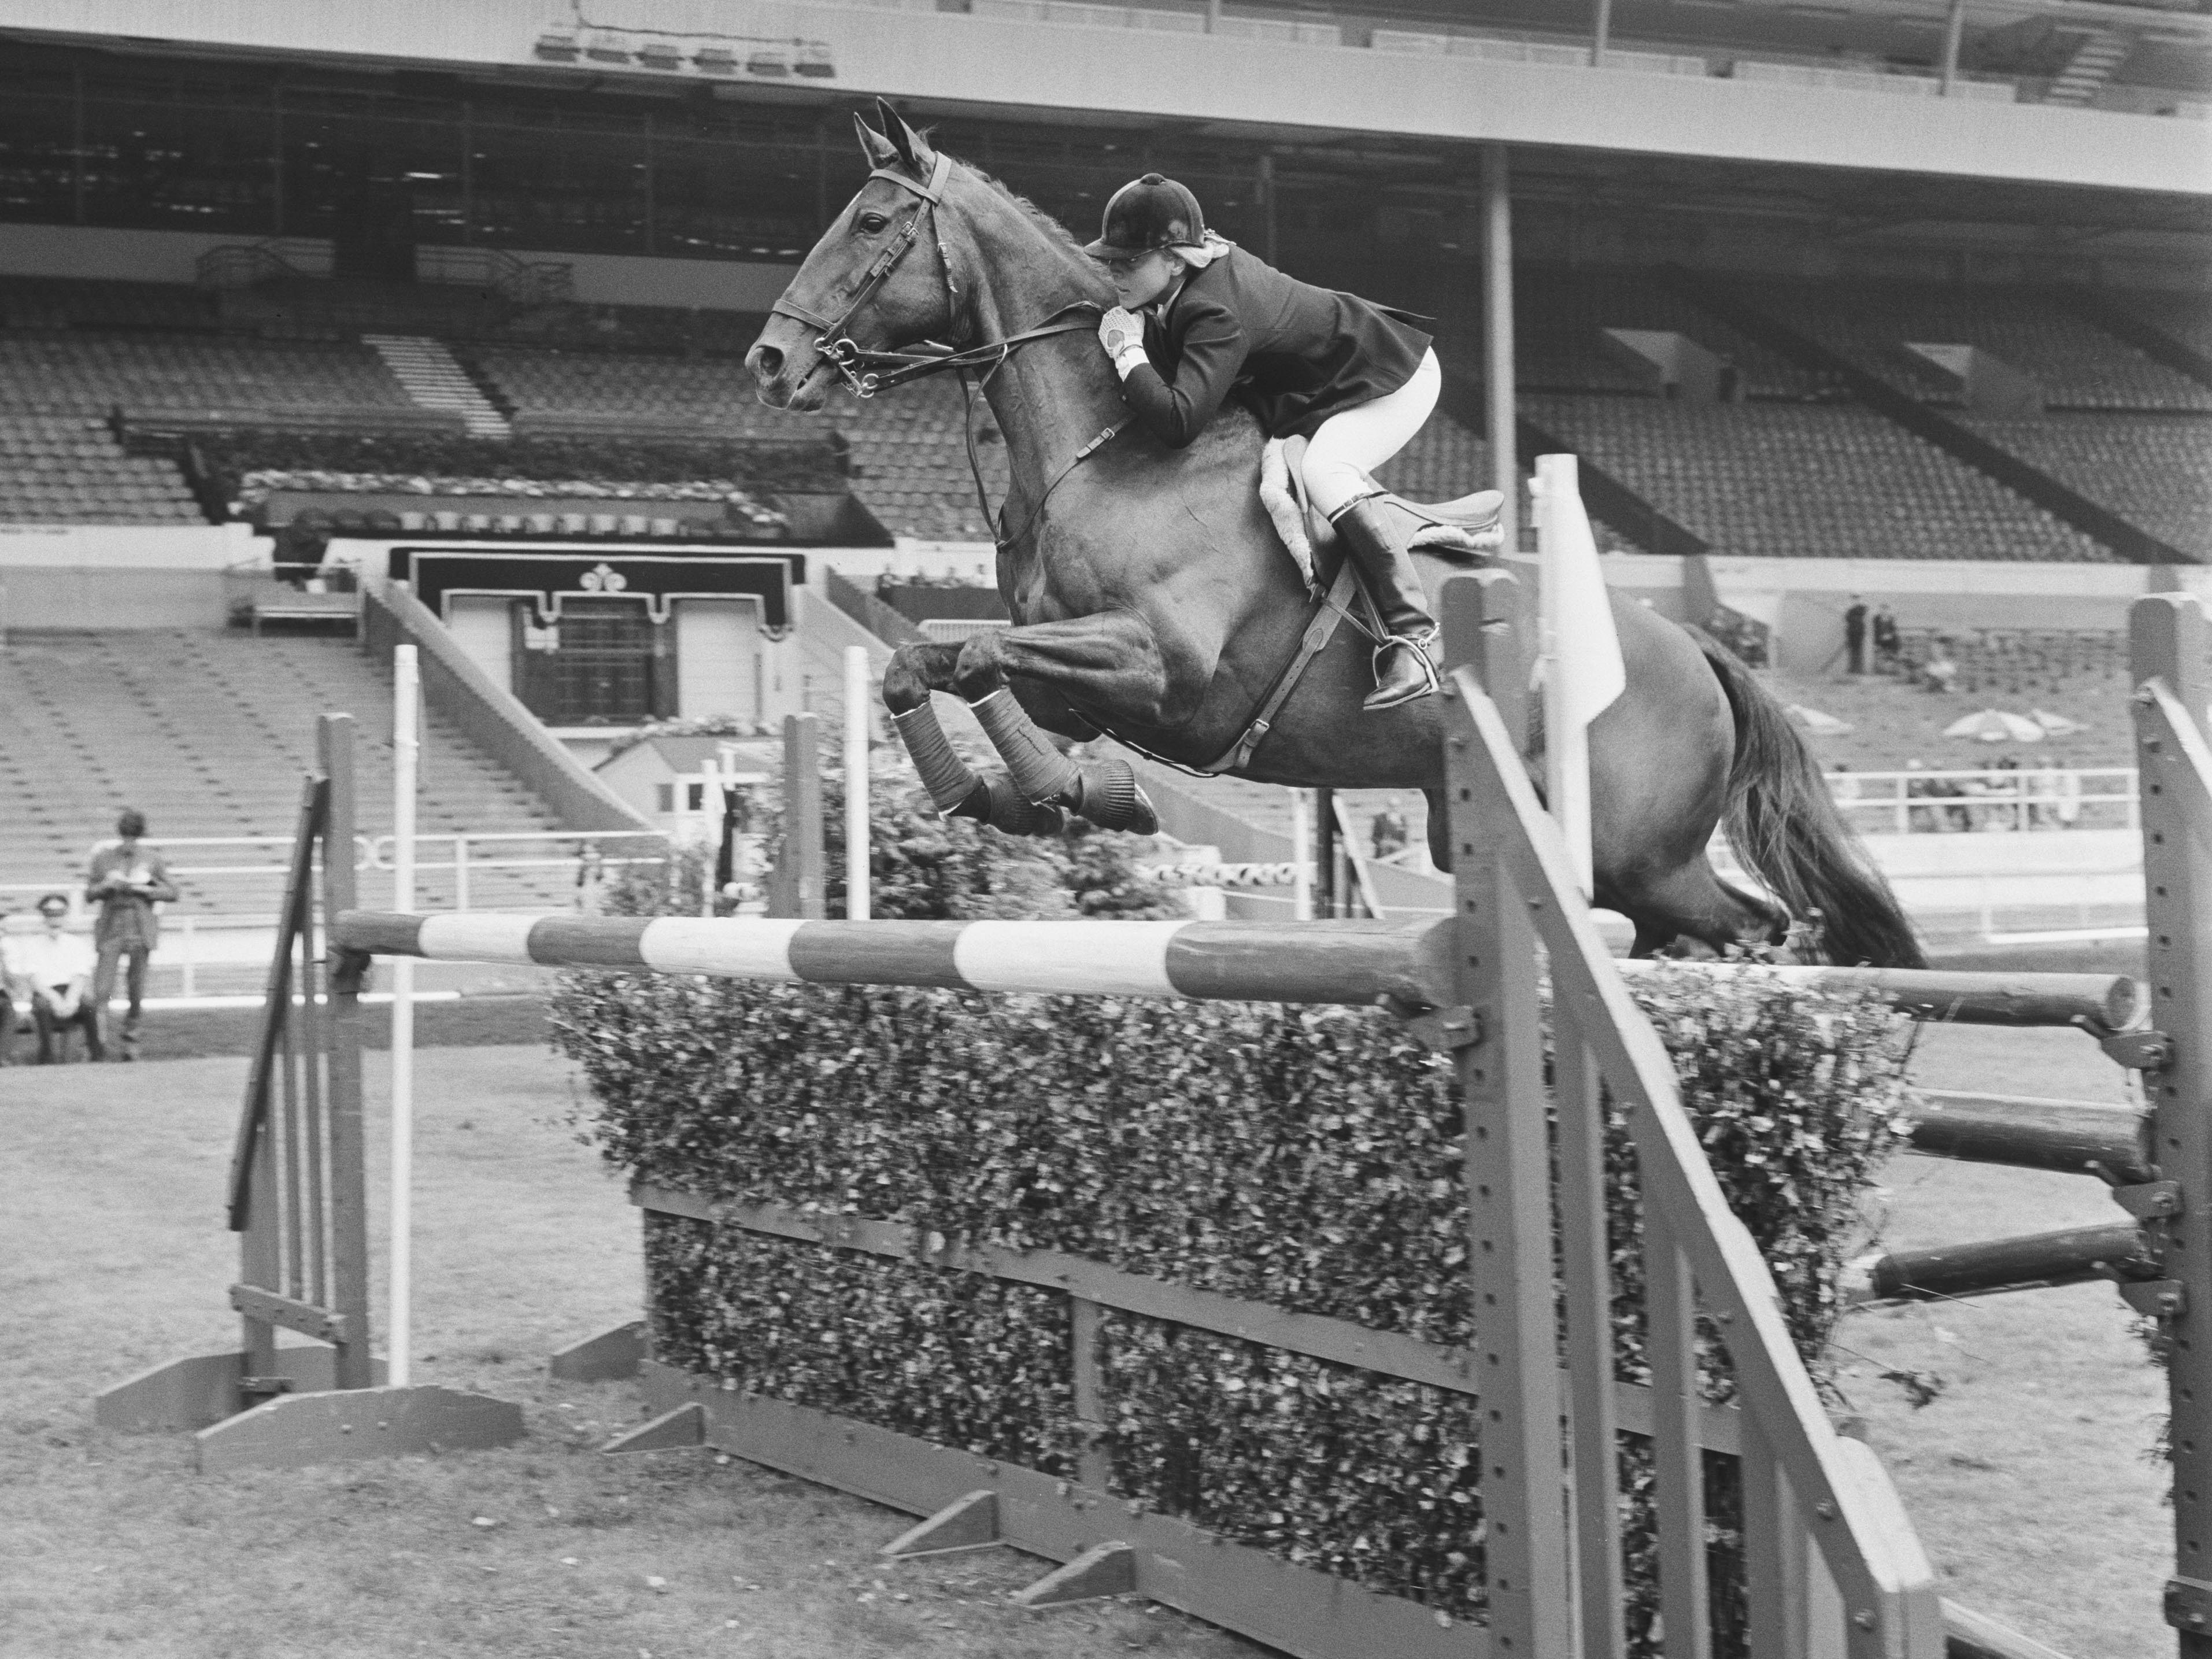 Ann Moore won an individual jumping silver medal at the 1972 Munich Olympics on her horse Psalm